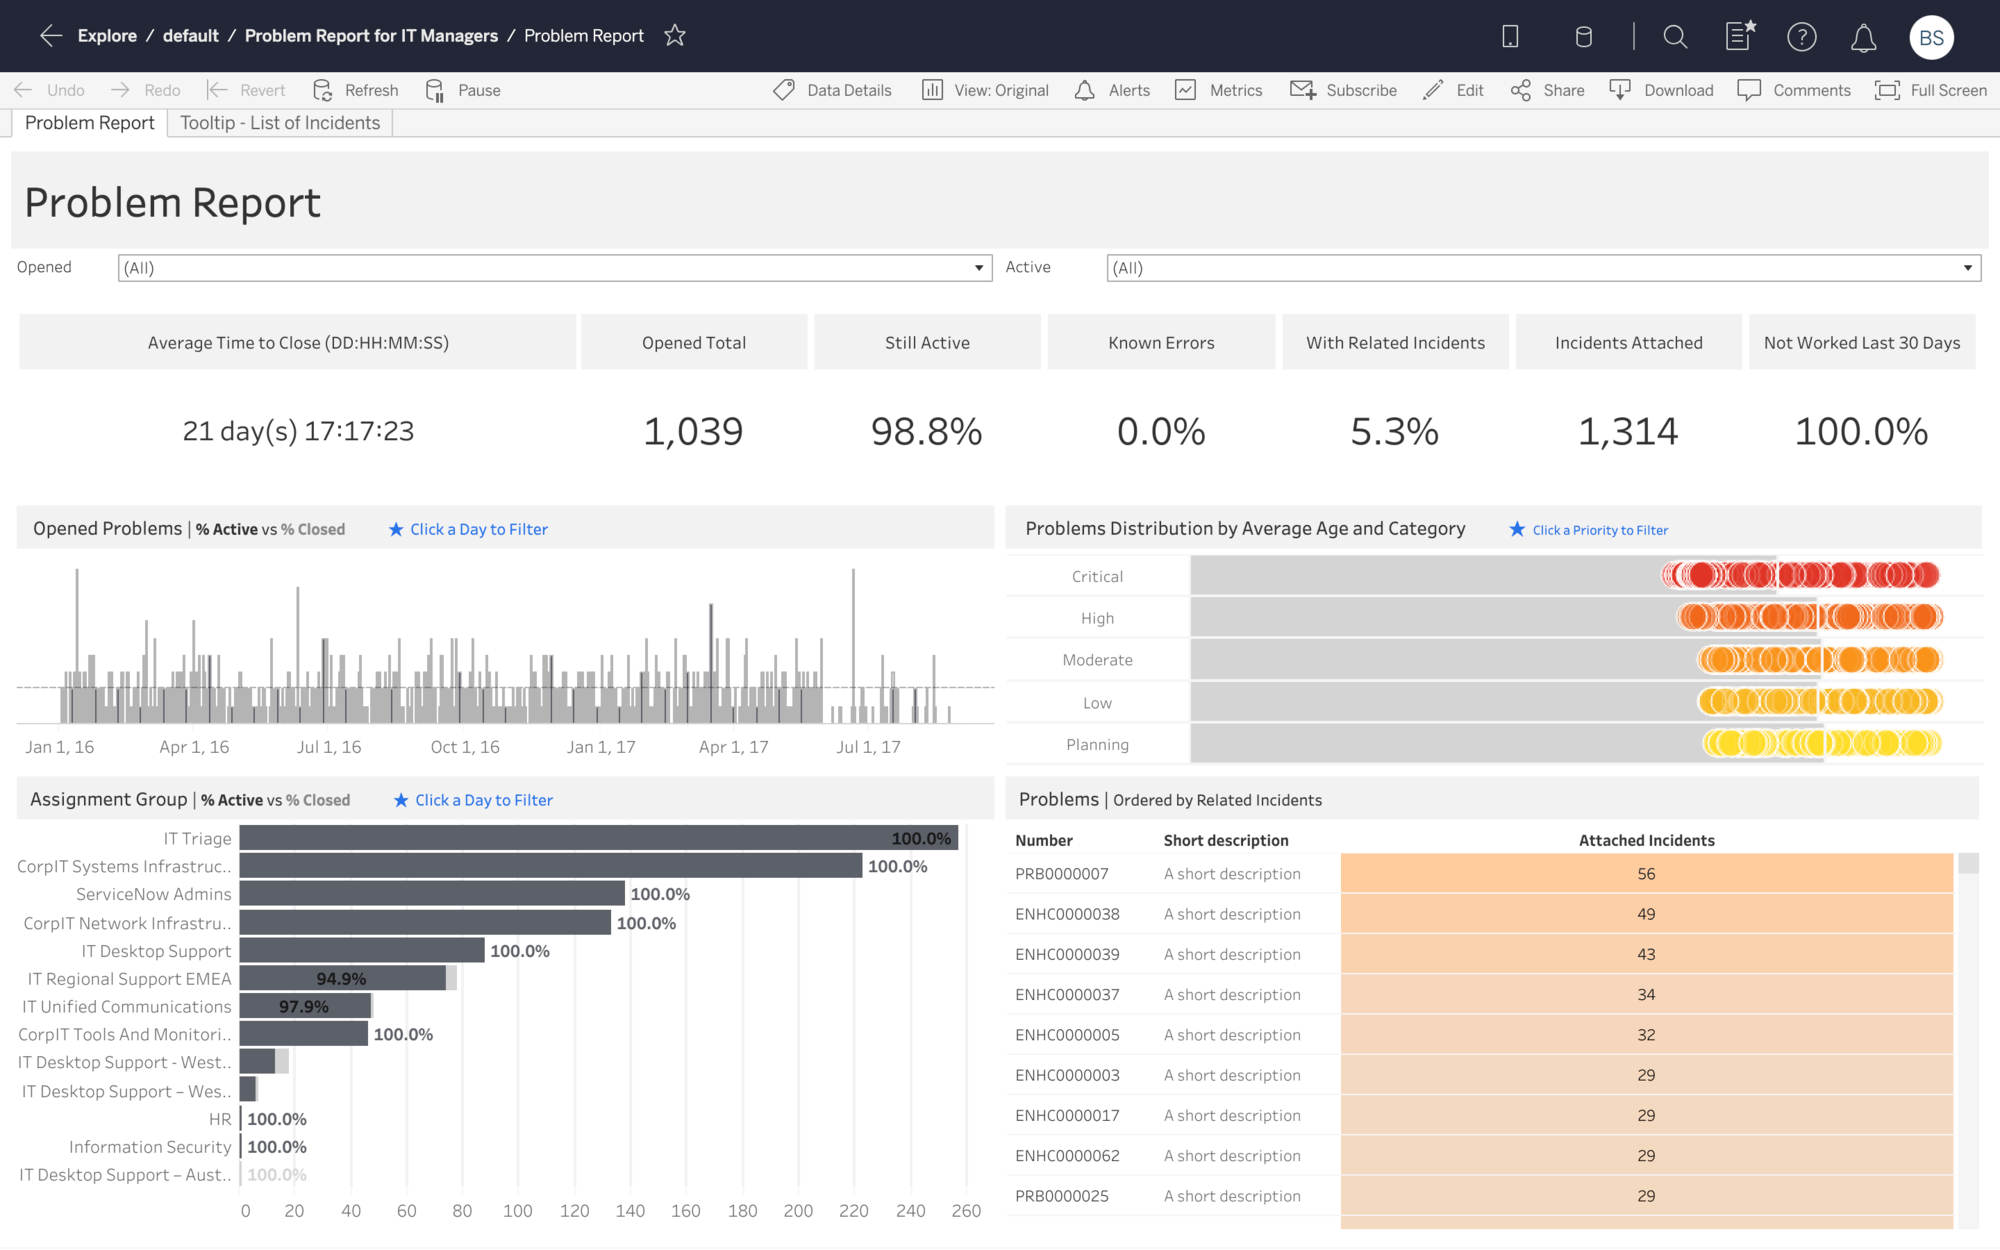 Tableau Fundamentals: An Introduction to Dashboards and Distribution